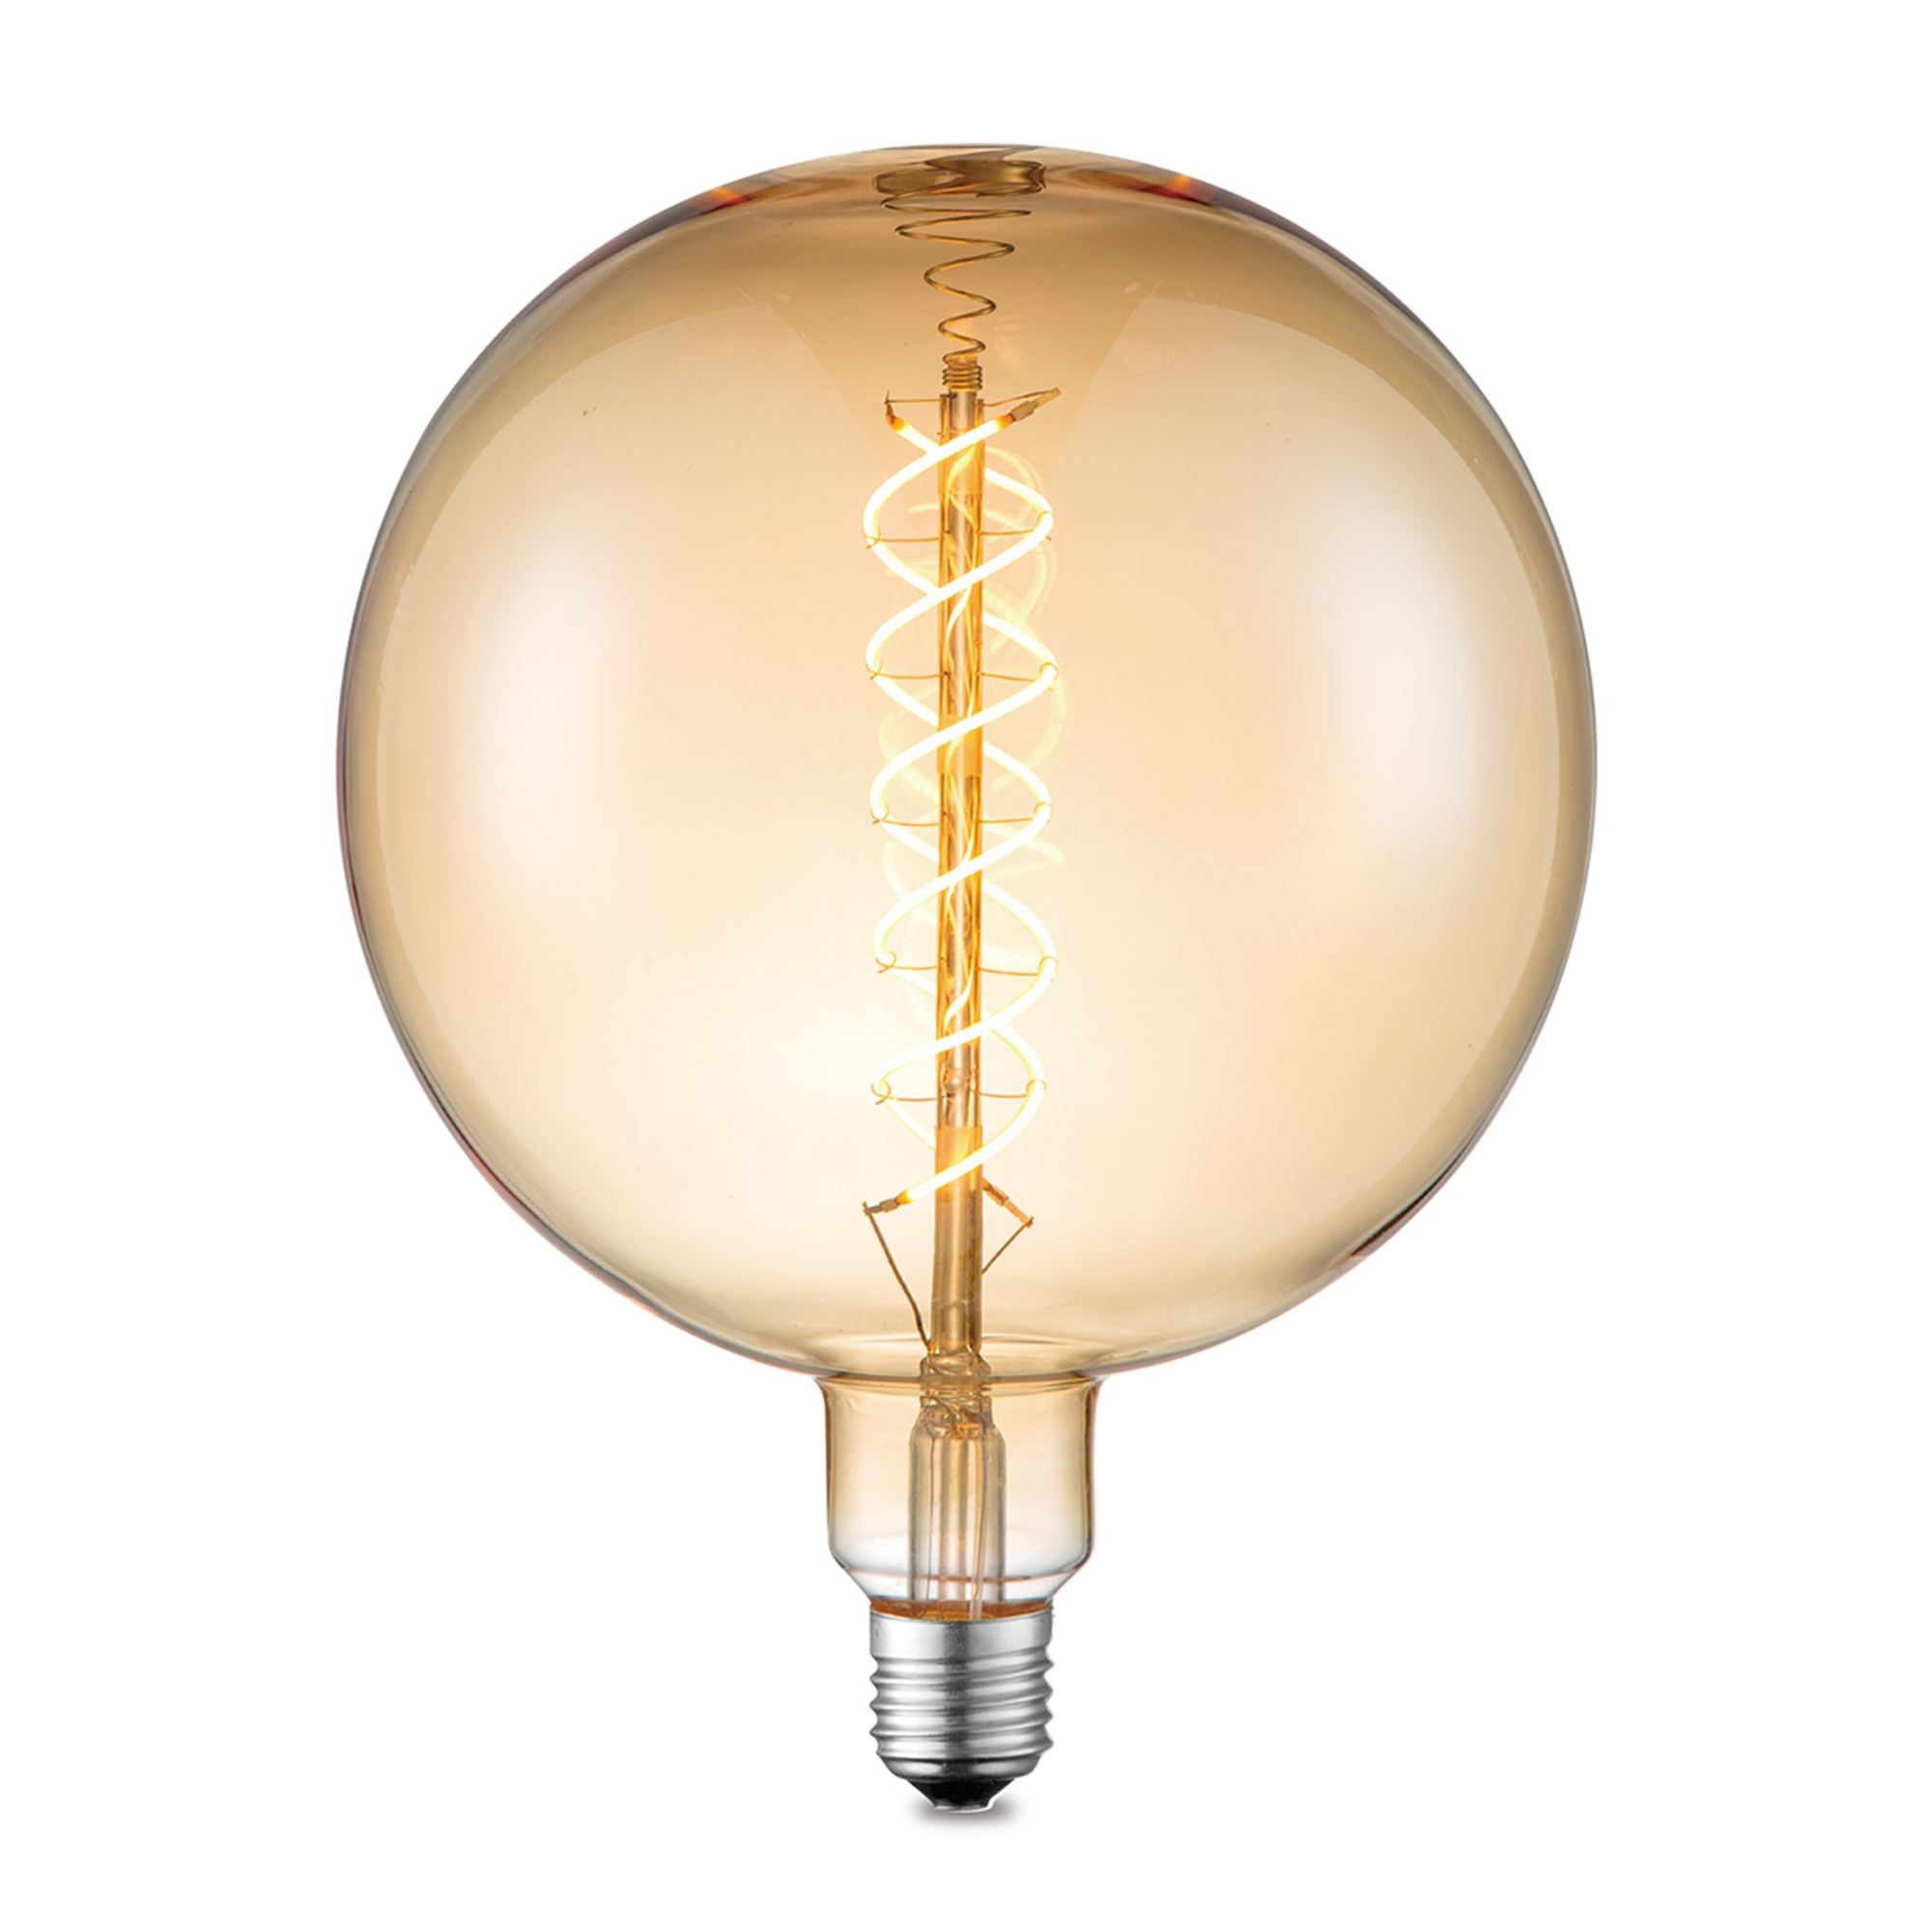 LED-Leuchtmittel 'Spiral' amber E27 4W 270 lm dimmbar + product picture